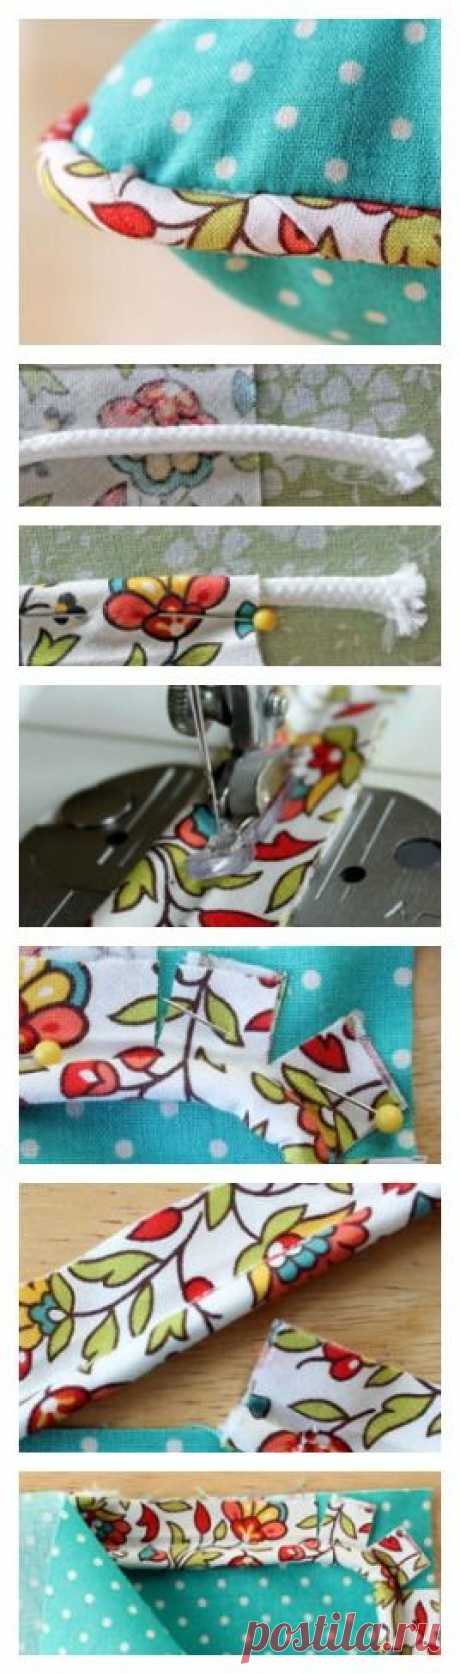 How to Sew Piping from Country Woman - shared by Beth Huntington of The Renegade Seamstress - House Interior Designs